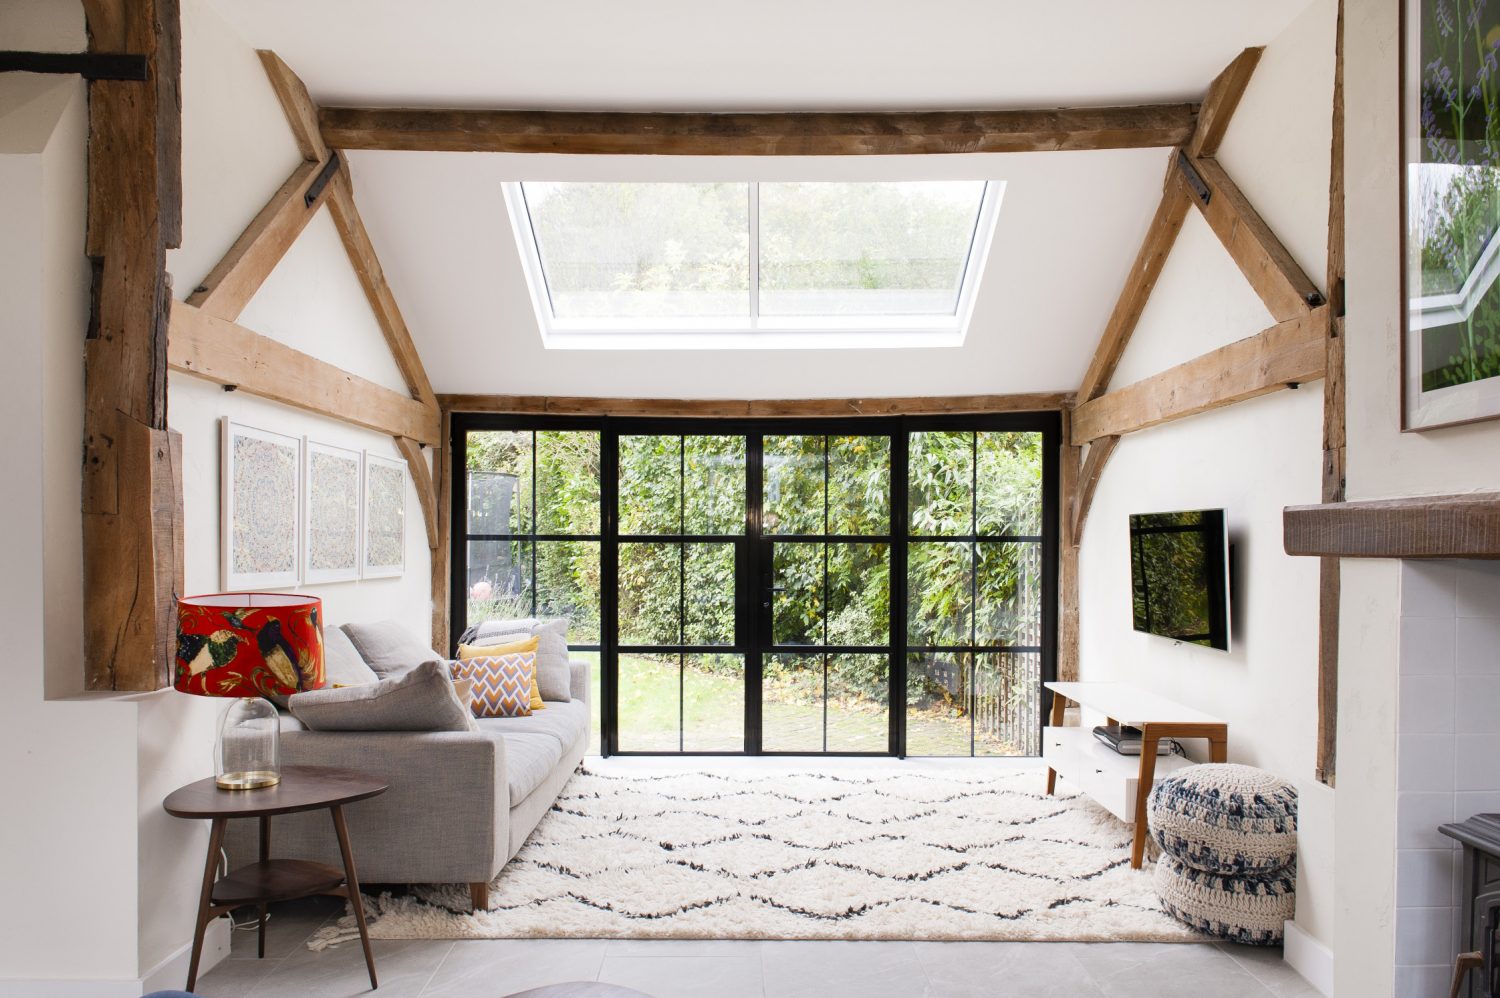 Richard and Tanya created the ‘inside/outside’ feeling they craved by glazing the entire southfacing back wall of the sitting room with ‘Crittall-style’ windows and French doors